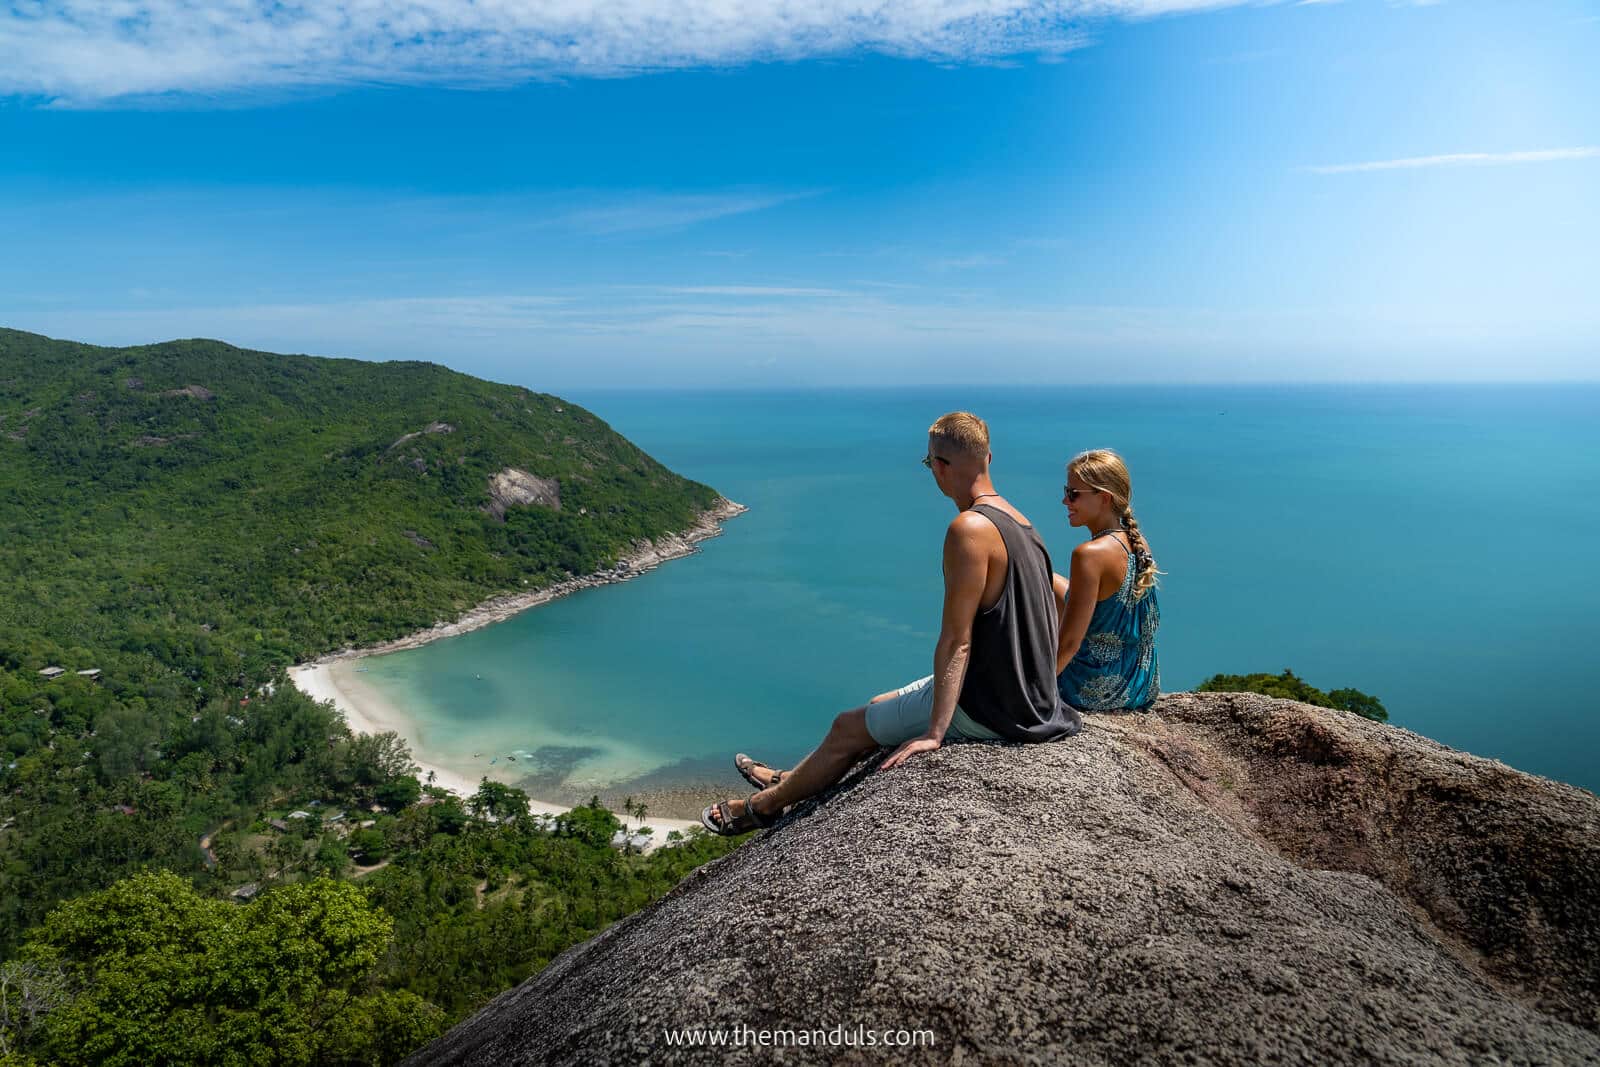 bottle beach viewpoint best beaches koh phangan things to do in koh phangan itinerary top attractions koh phangan thailand best viewoints